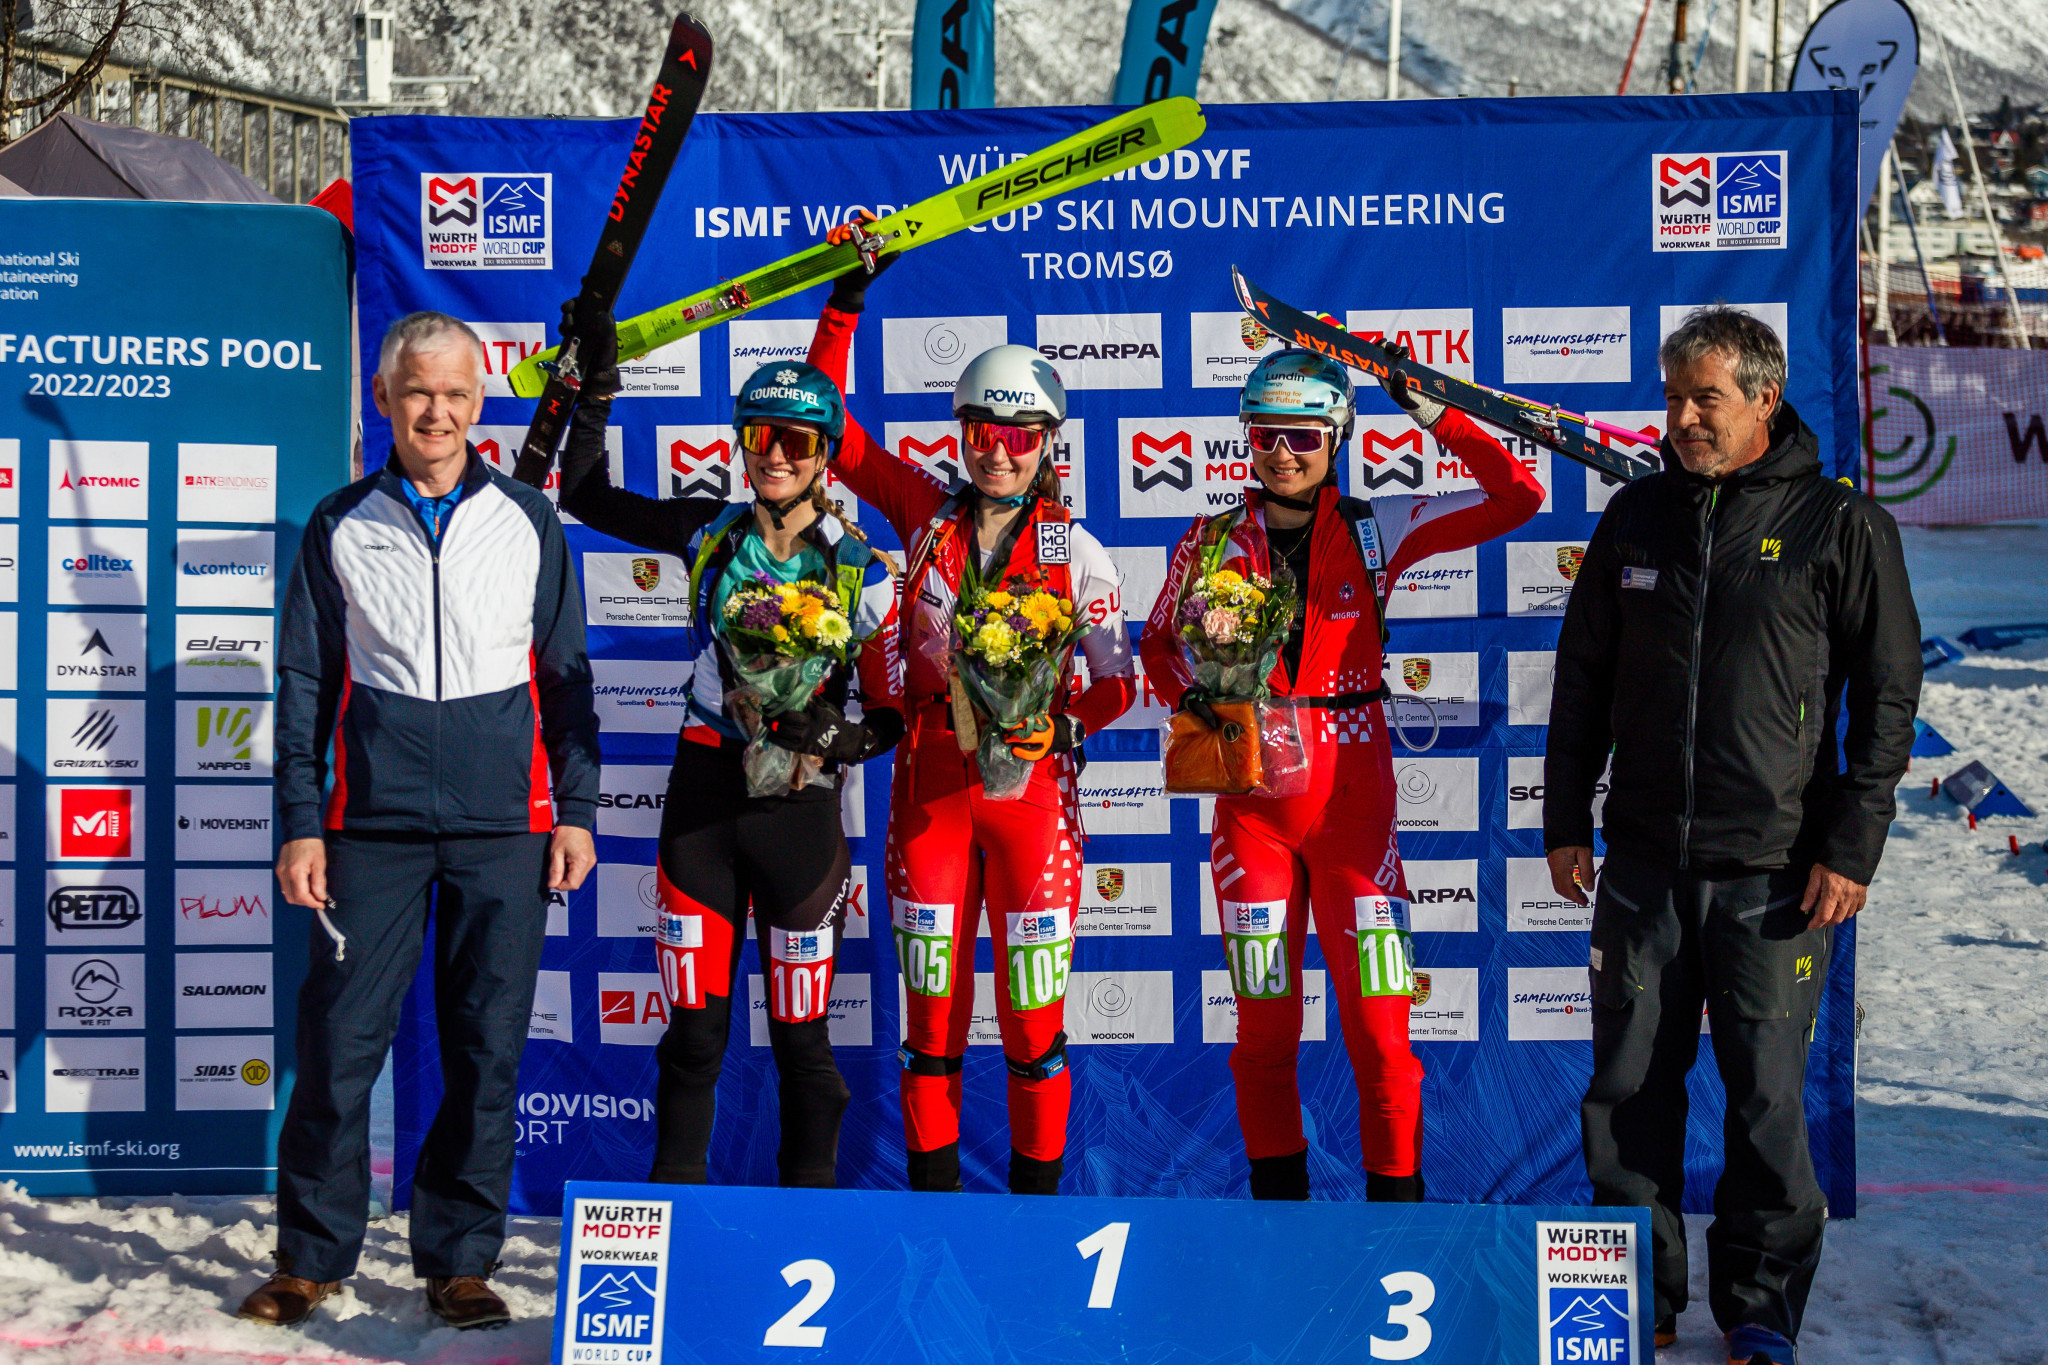 Harrop claims women’s overall crown at Tromsø ISMF World Cup as Fatton triumphs